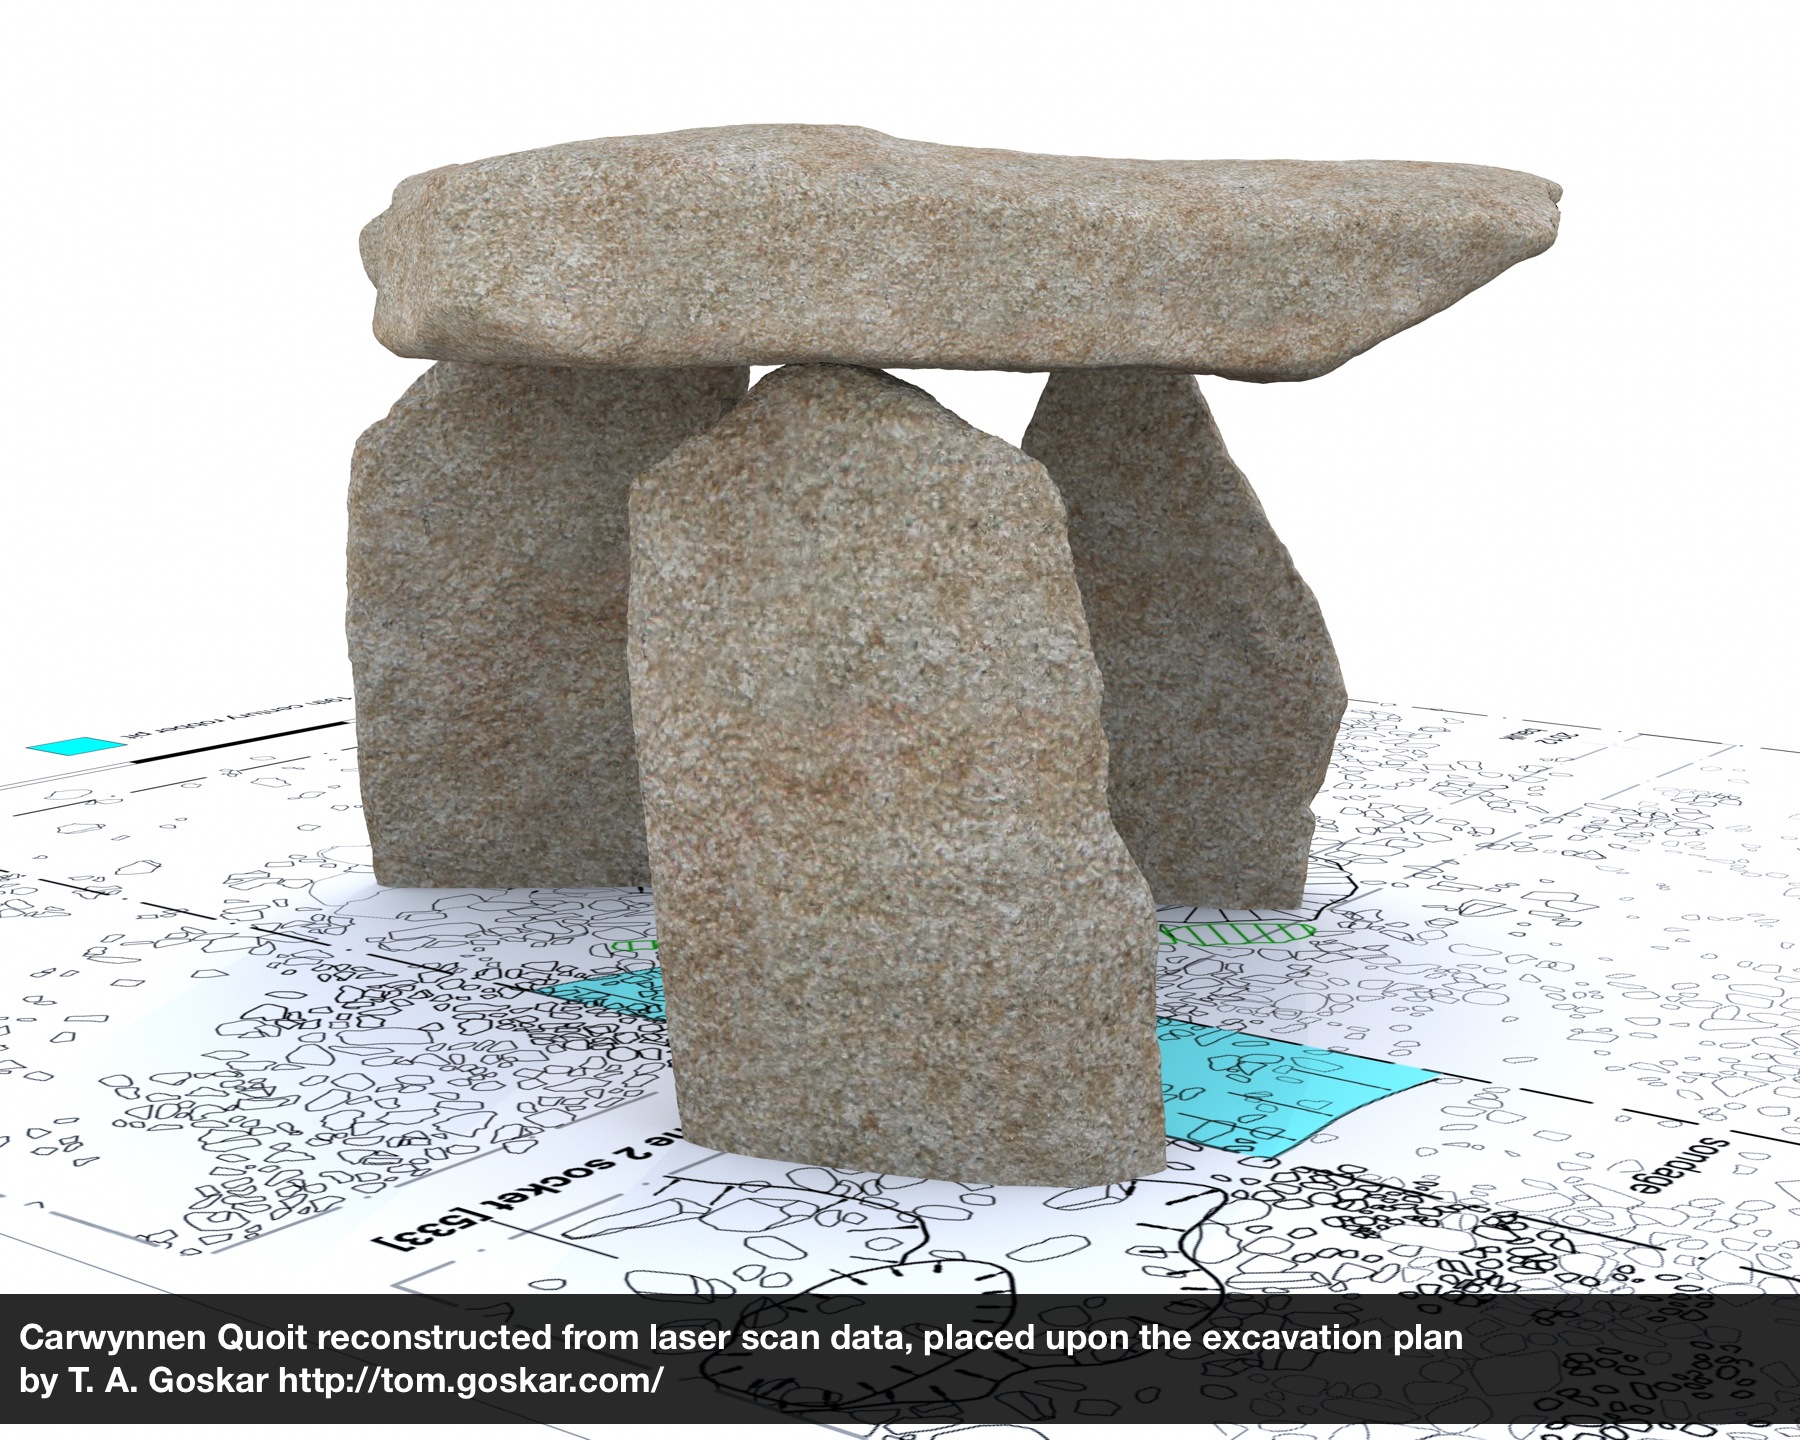 Carwynnen Quoit reconstructed from laser scan data, placed upon the excavation plan